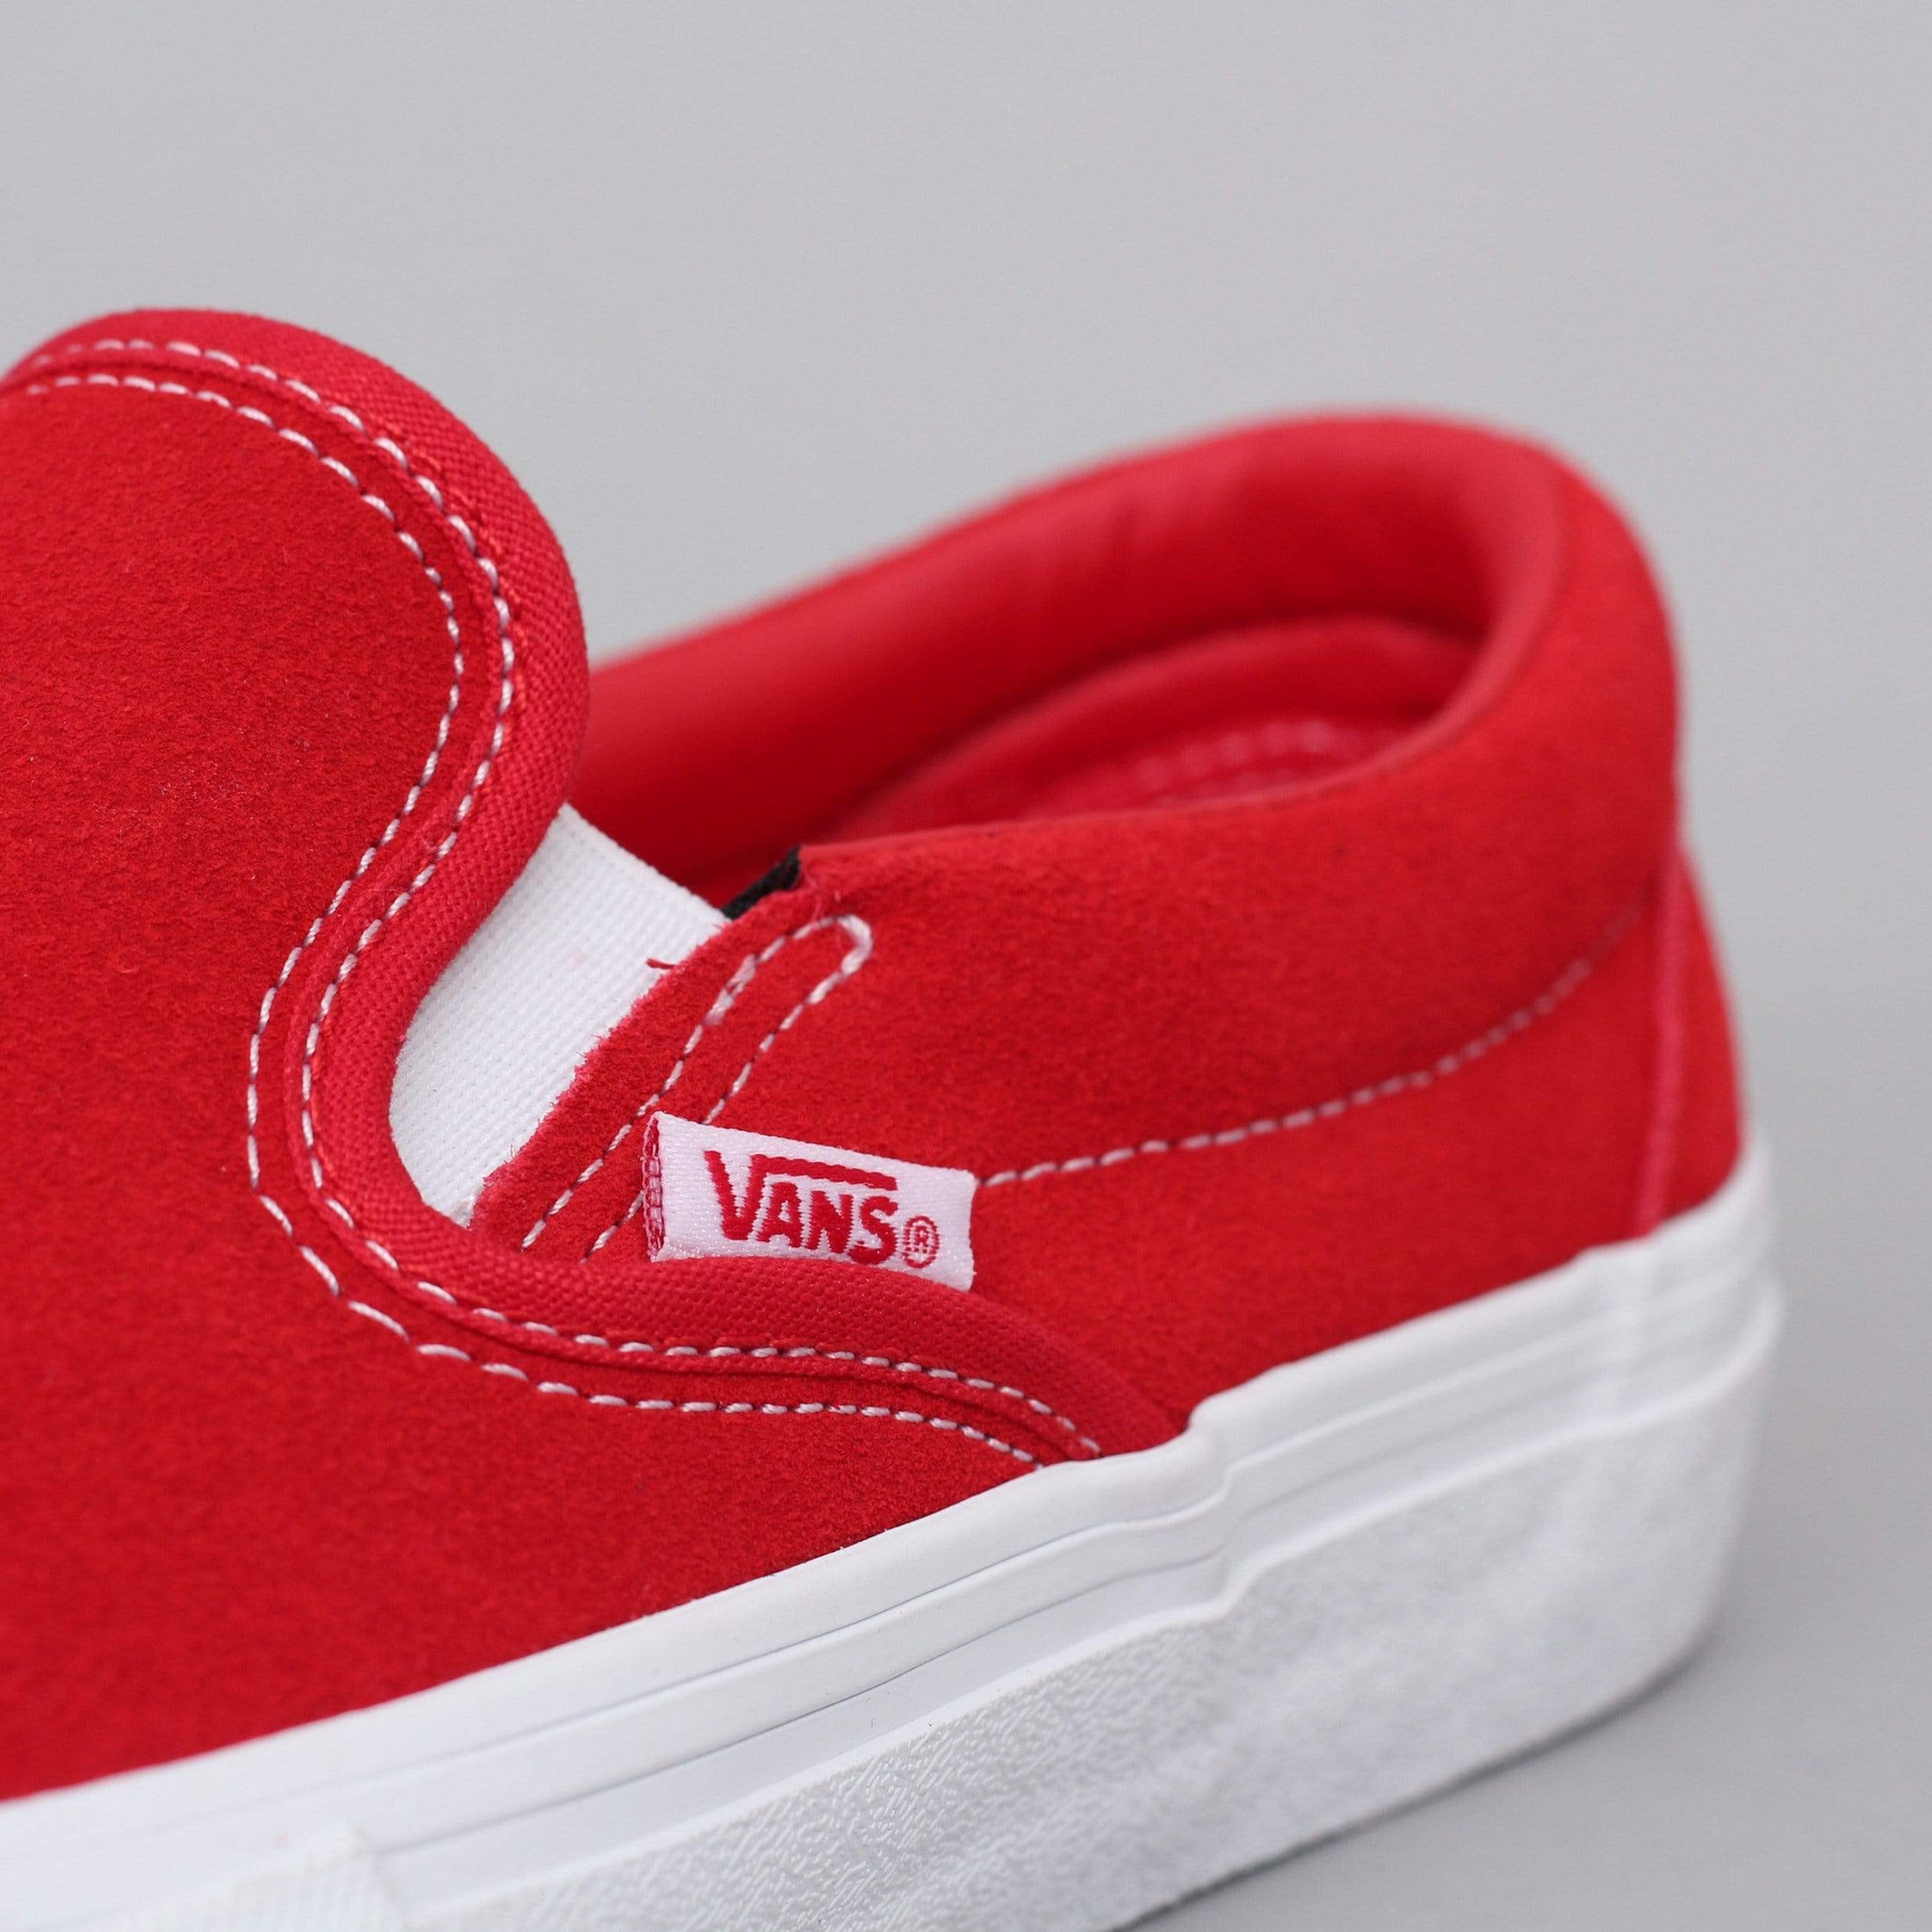 Vans Slip-On Pro Shoes (Suede) Red / White